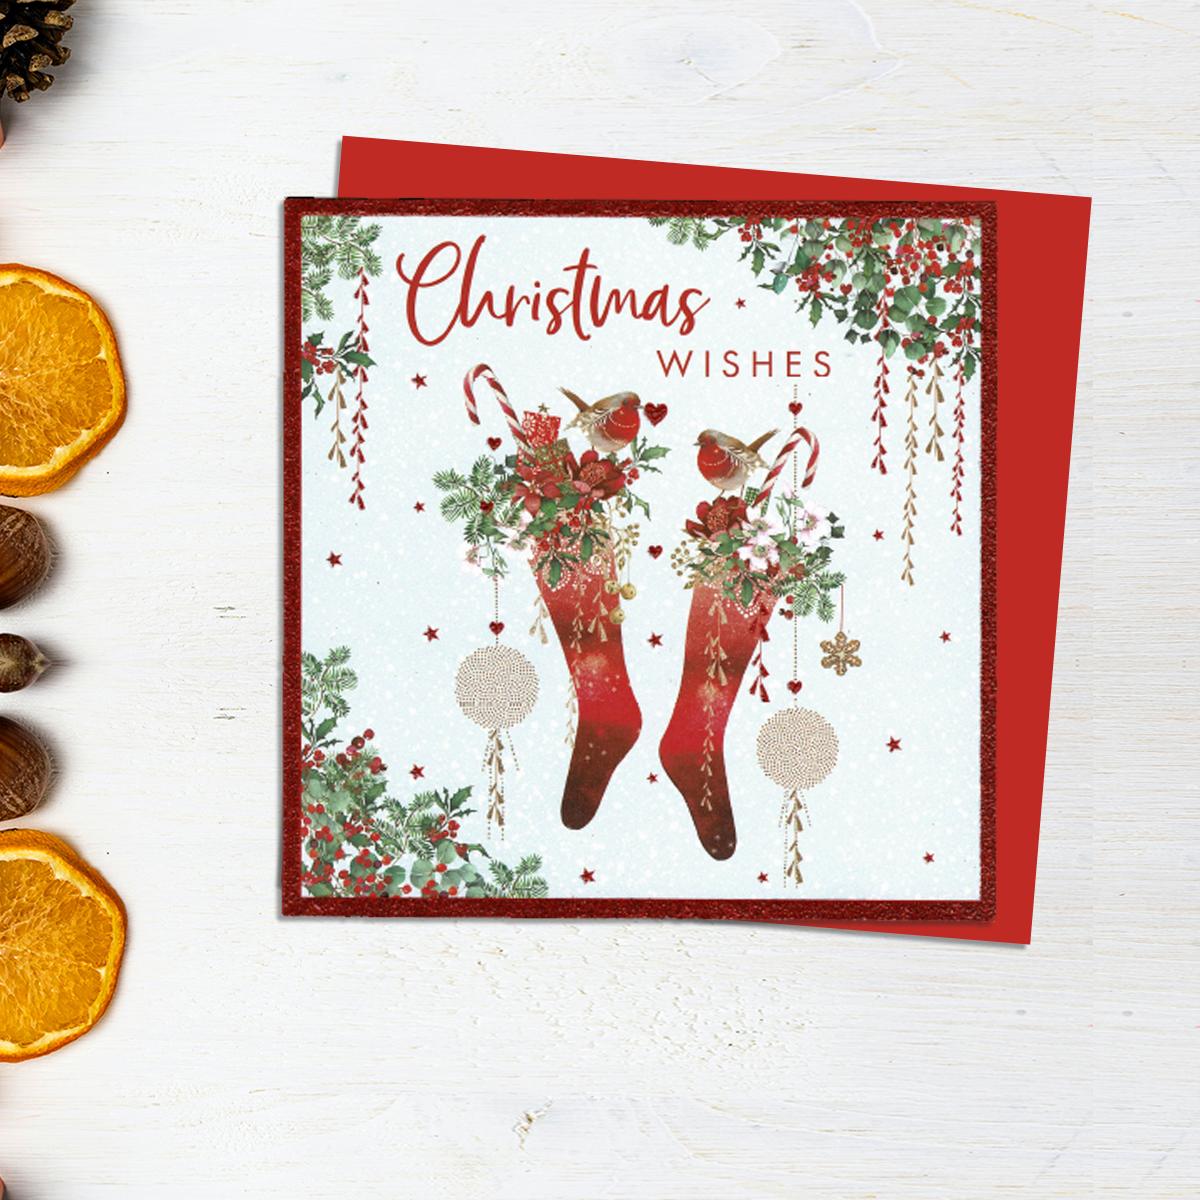 Christmas Wishes Card Showing Two Stockings With Candy Canes And Robins. Finished With Red Lettering And Glitter. A Red Envelope Completes The Look